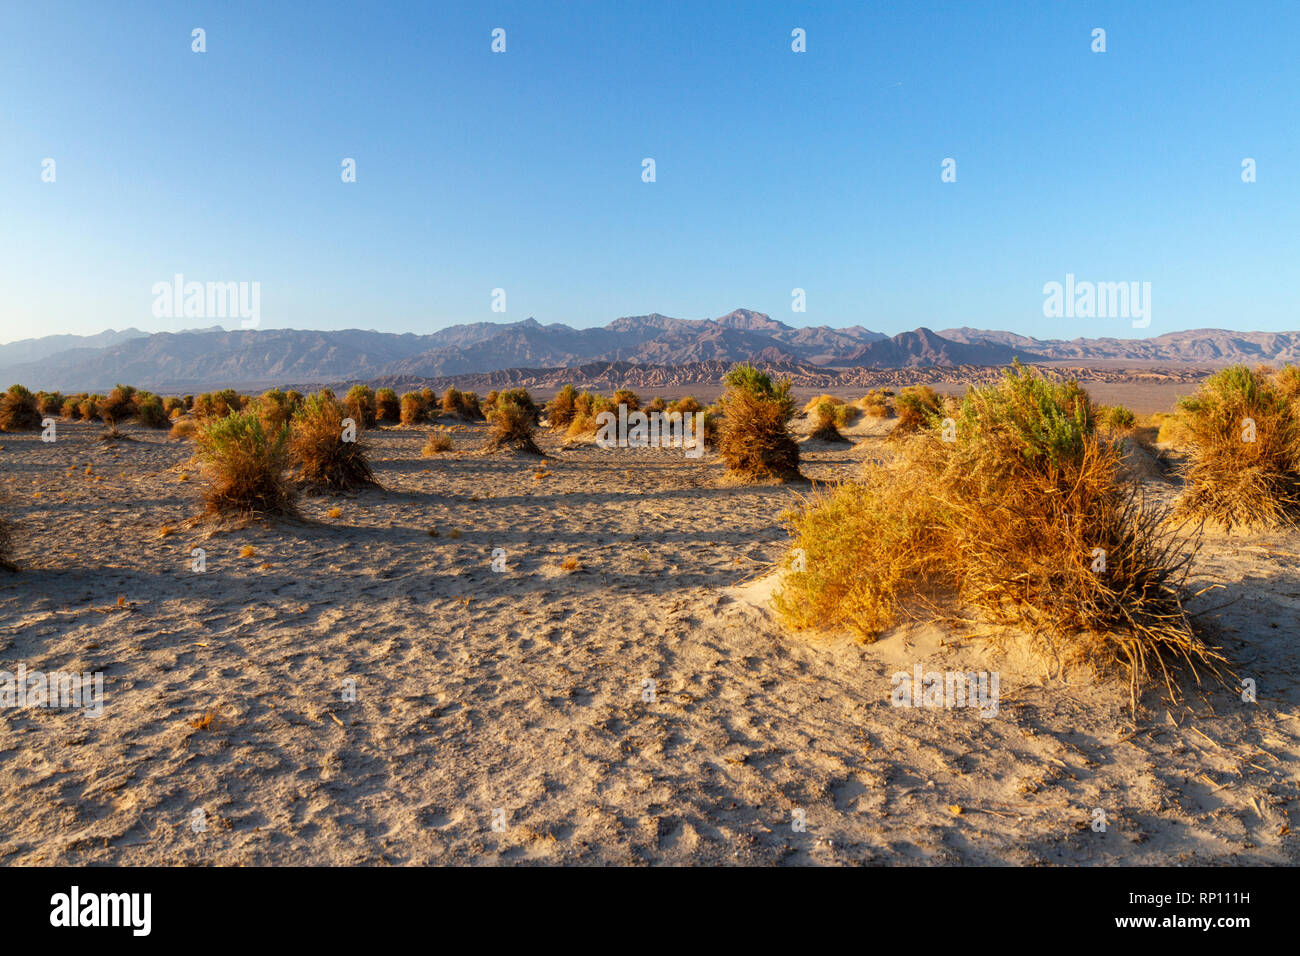 View across the desert from California State Route 190close to Hells Gate, Death Valley National Park, California, United States. Stock Photo